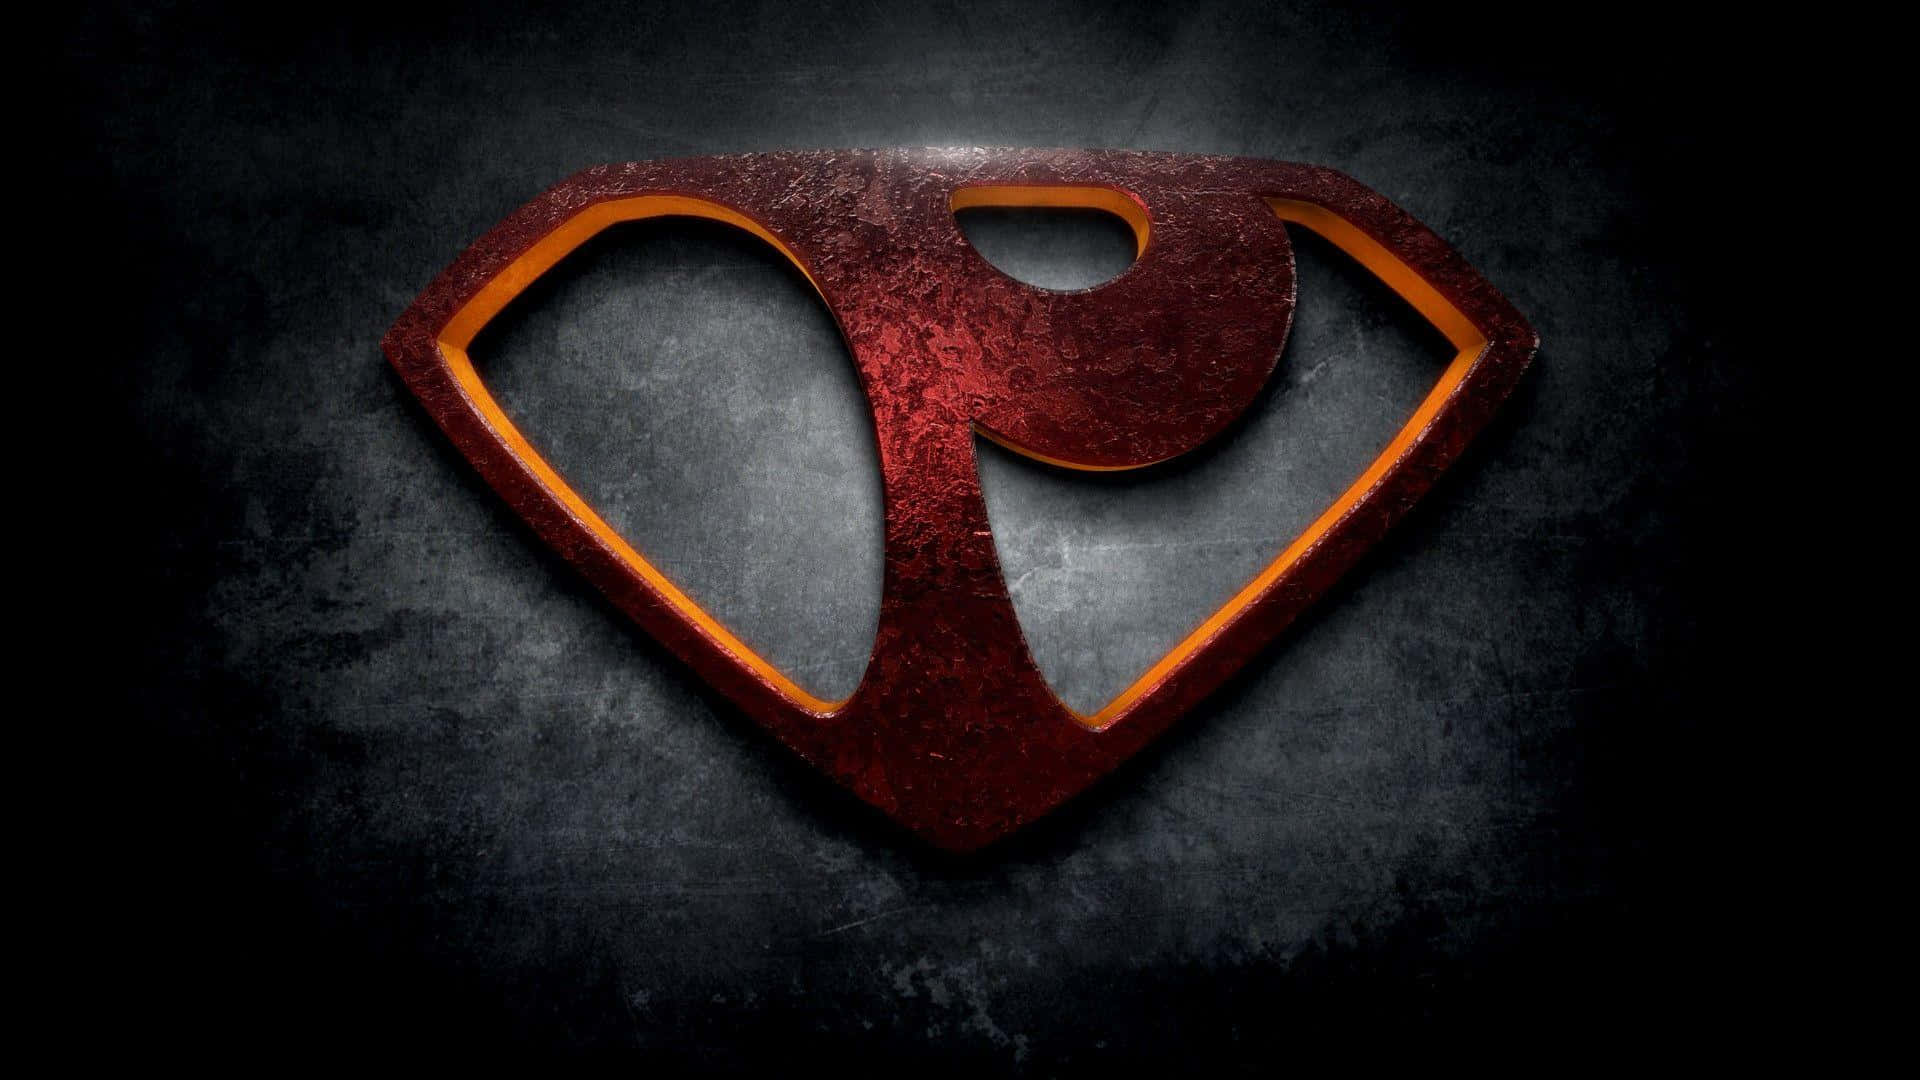 Supermanlogo-wallpapers In Hd